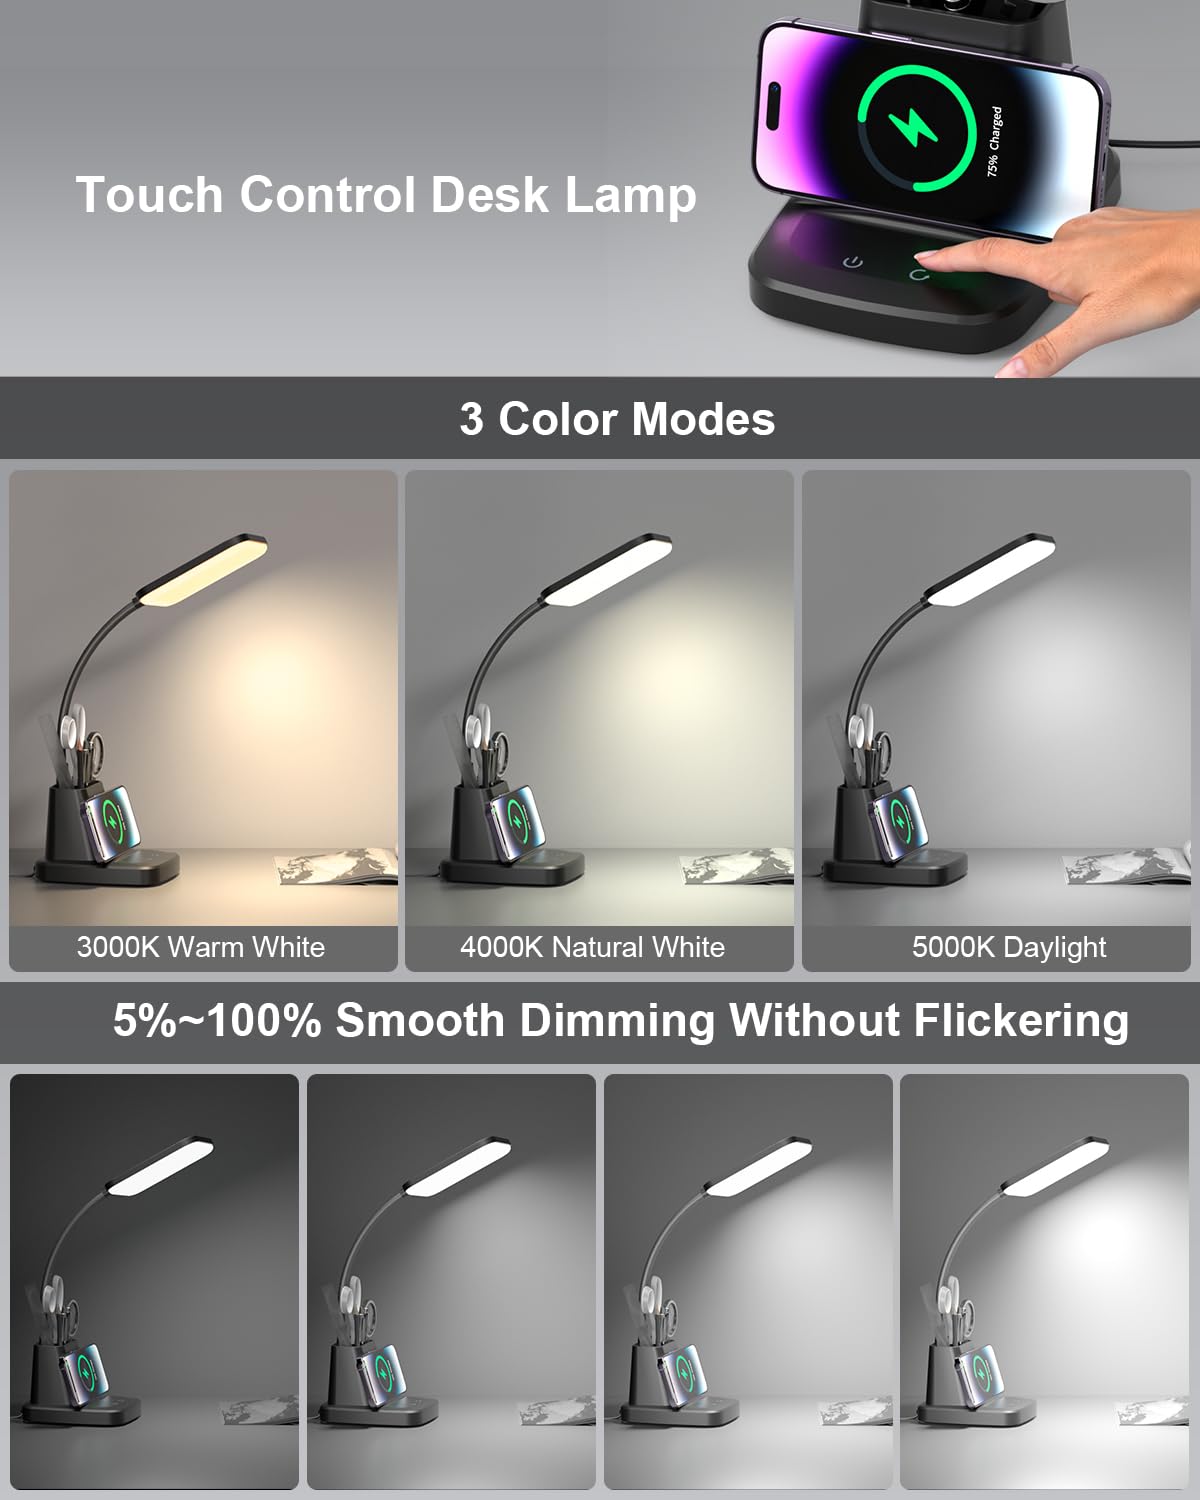 GOLSPARK Desk Lamp with Wireless Charger, LED Desk Lamp for Home Office 3 Color Modes CRI90+ Eye-Caring Reading Light with Pen Holder, Dimmable Gooseneck Touch Control Table Lamp for College Dorm Room